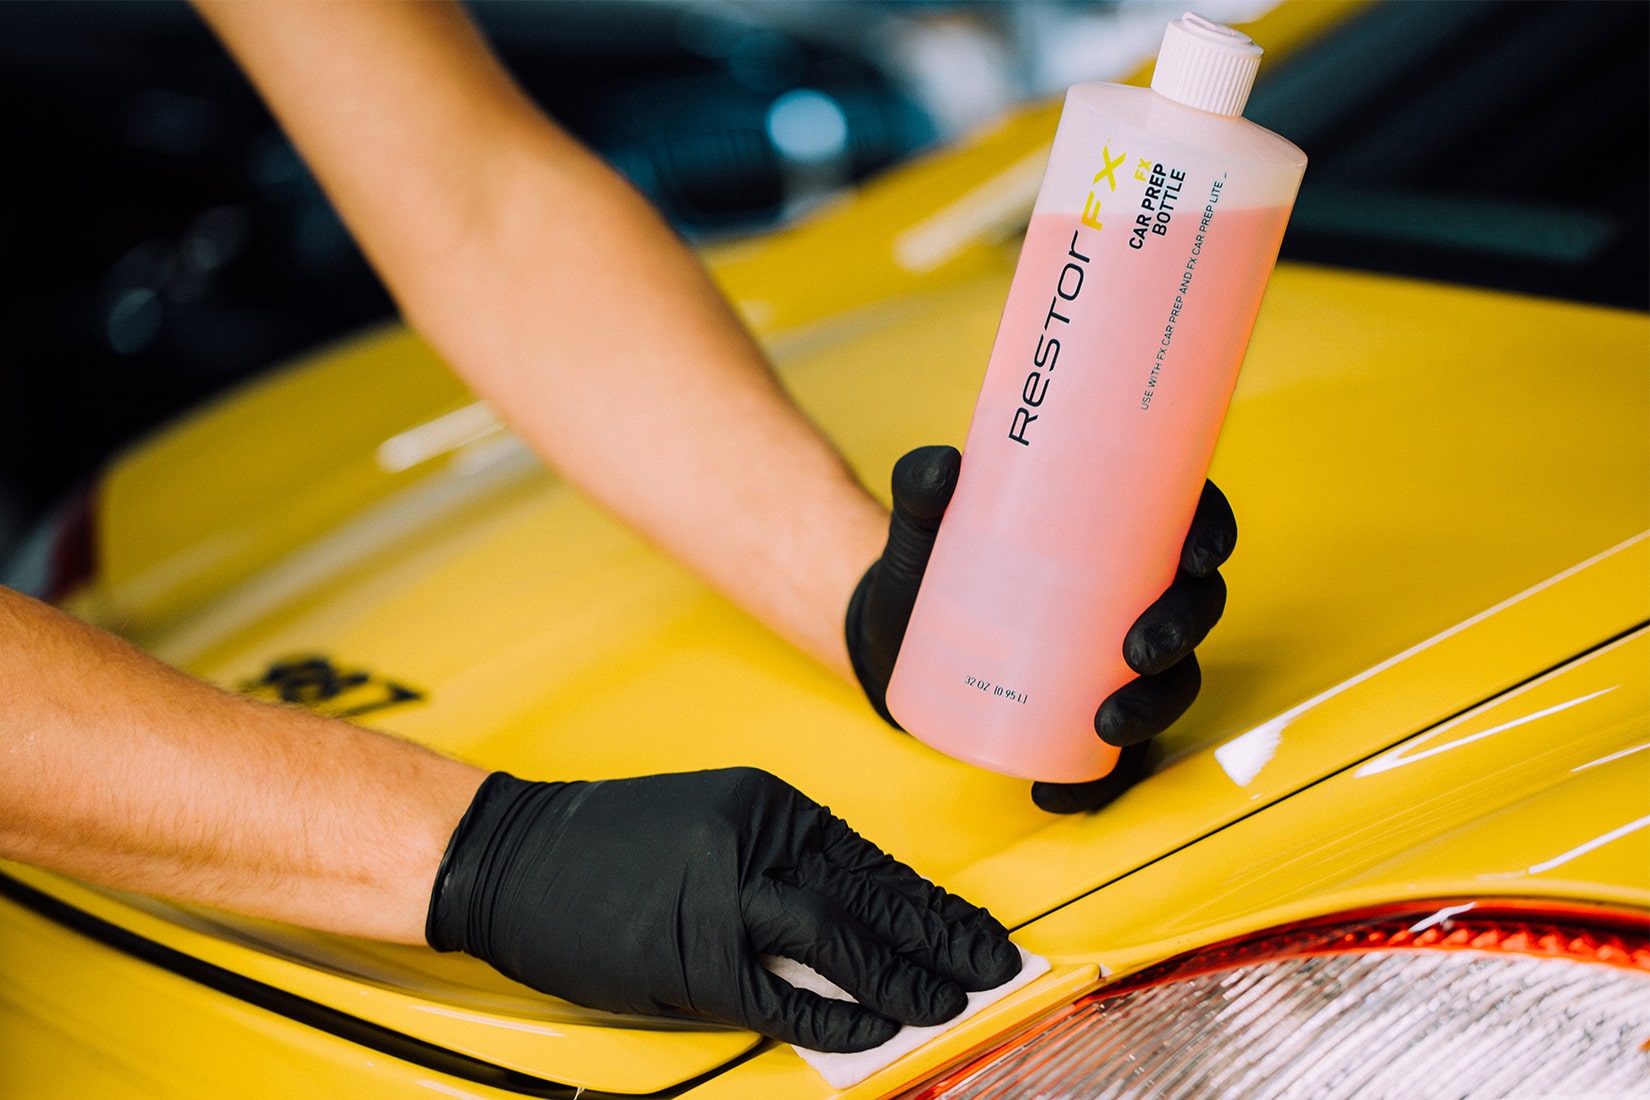 A RestorFX technician performing a Chemical Test using FX Car Prep on the surface of a yellow sports car